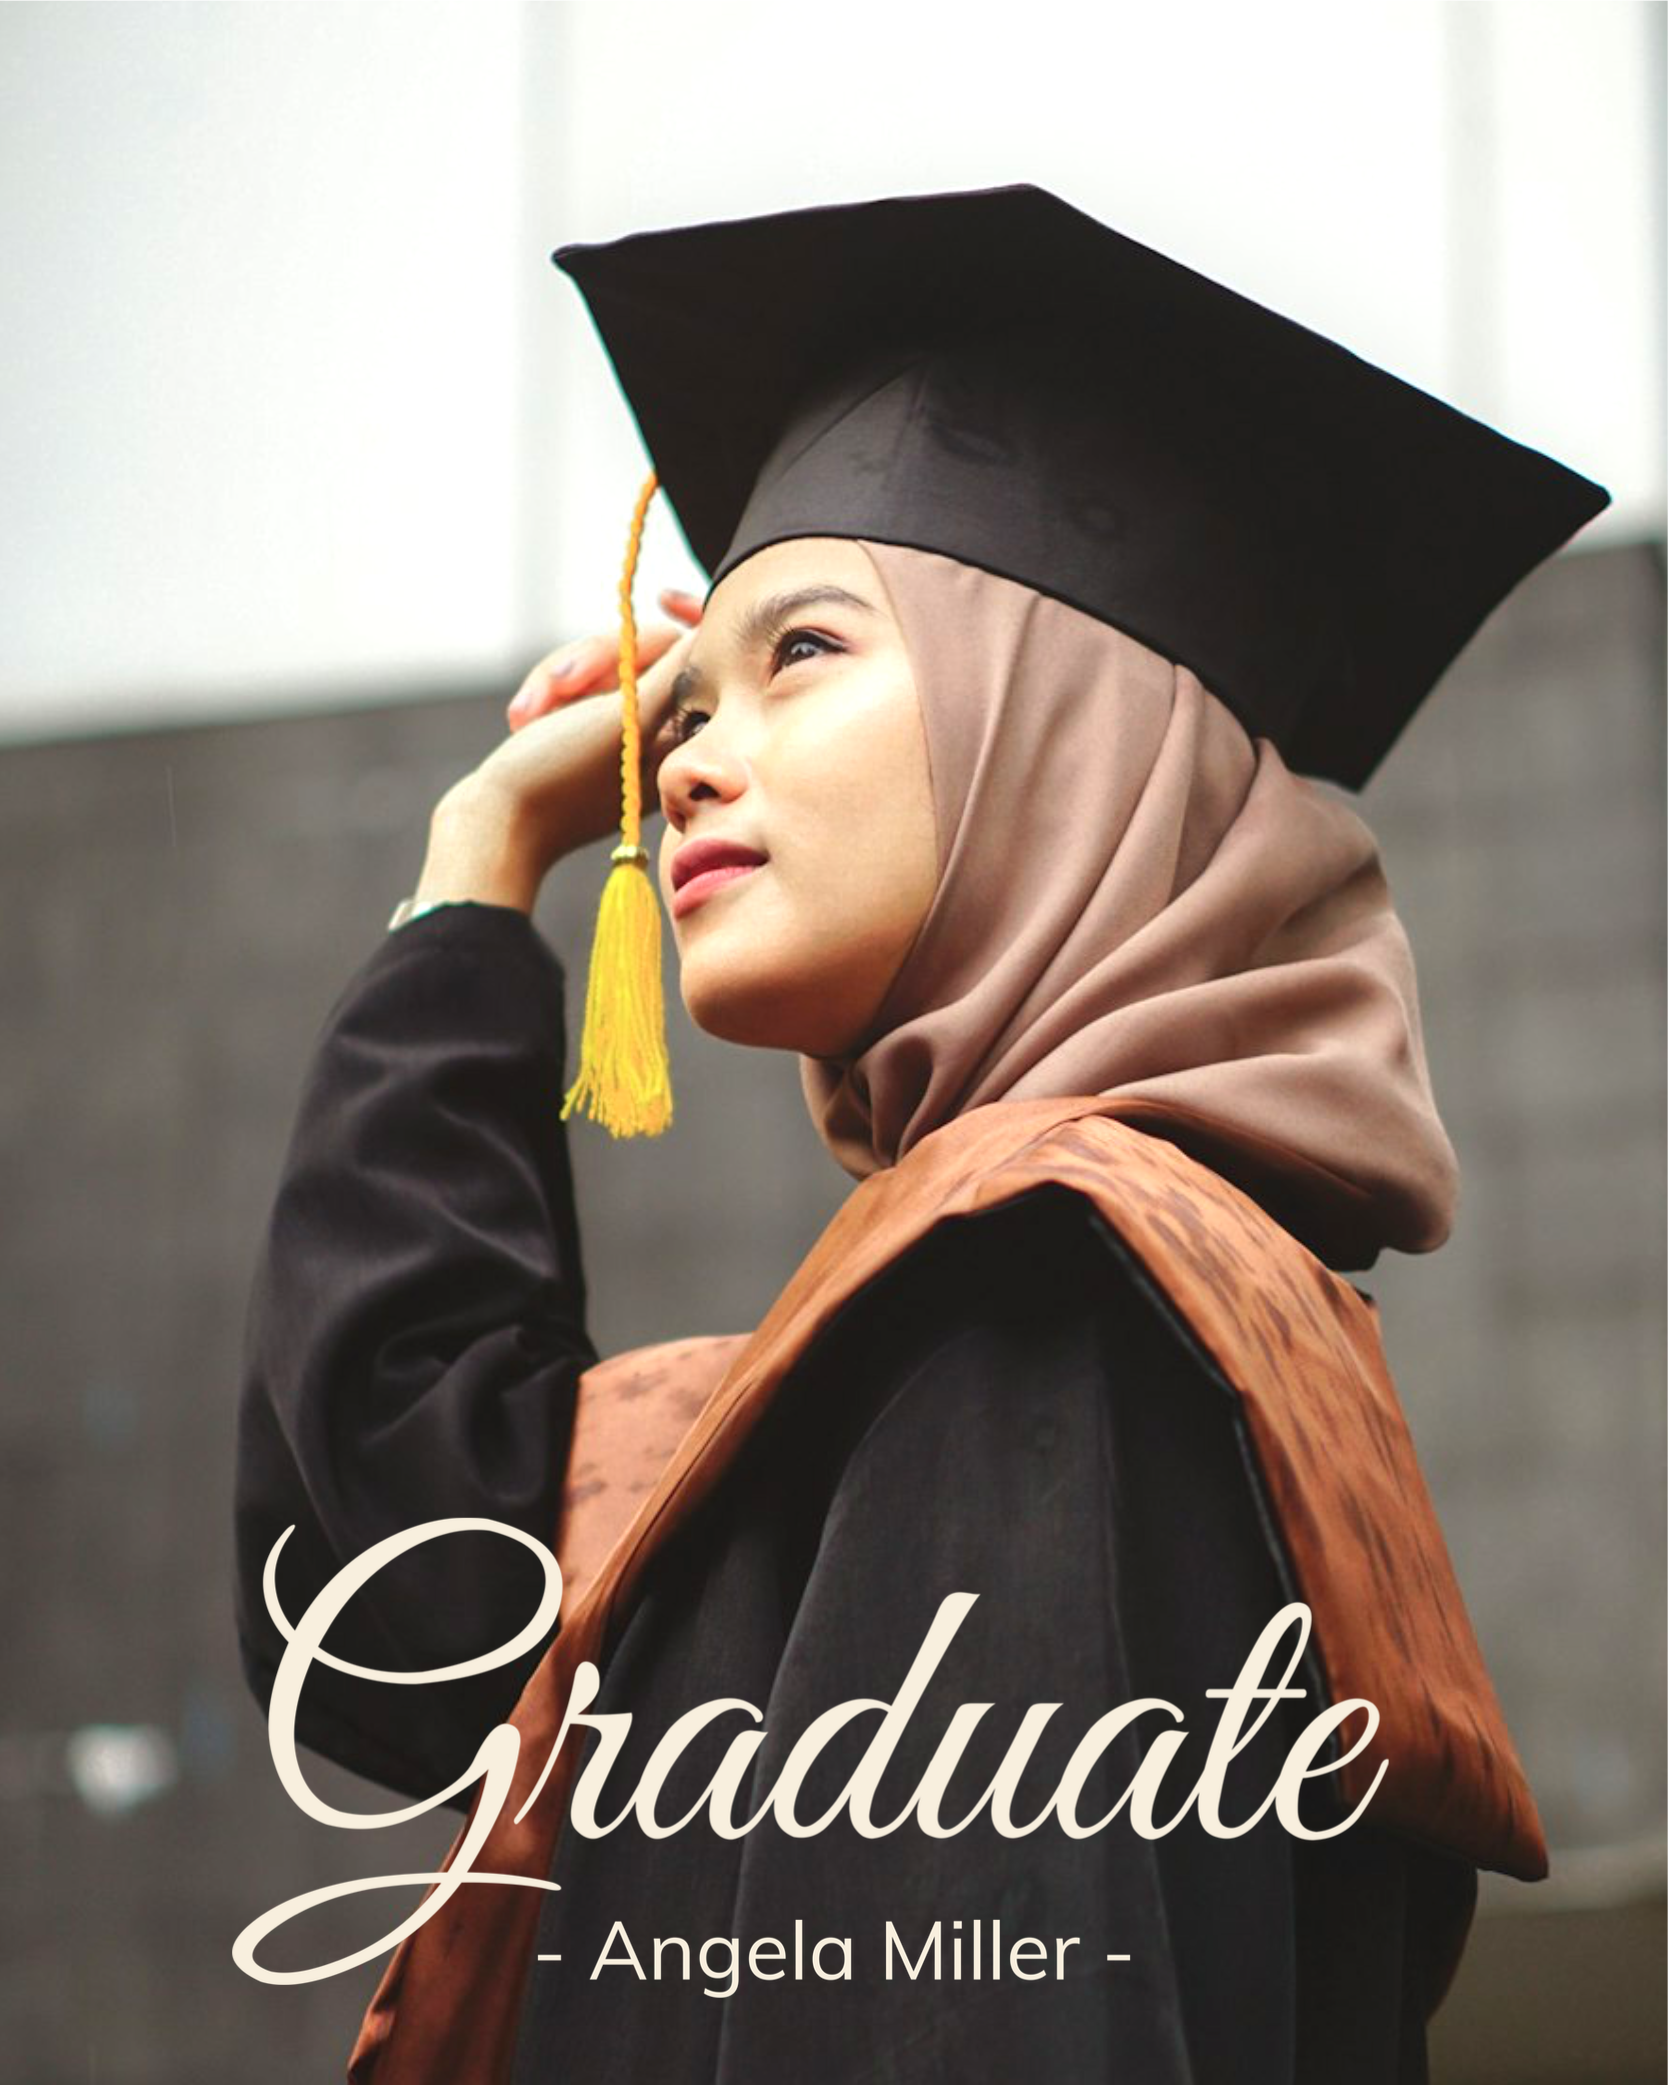 A photo of a female student Graduation Template